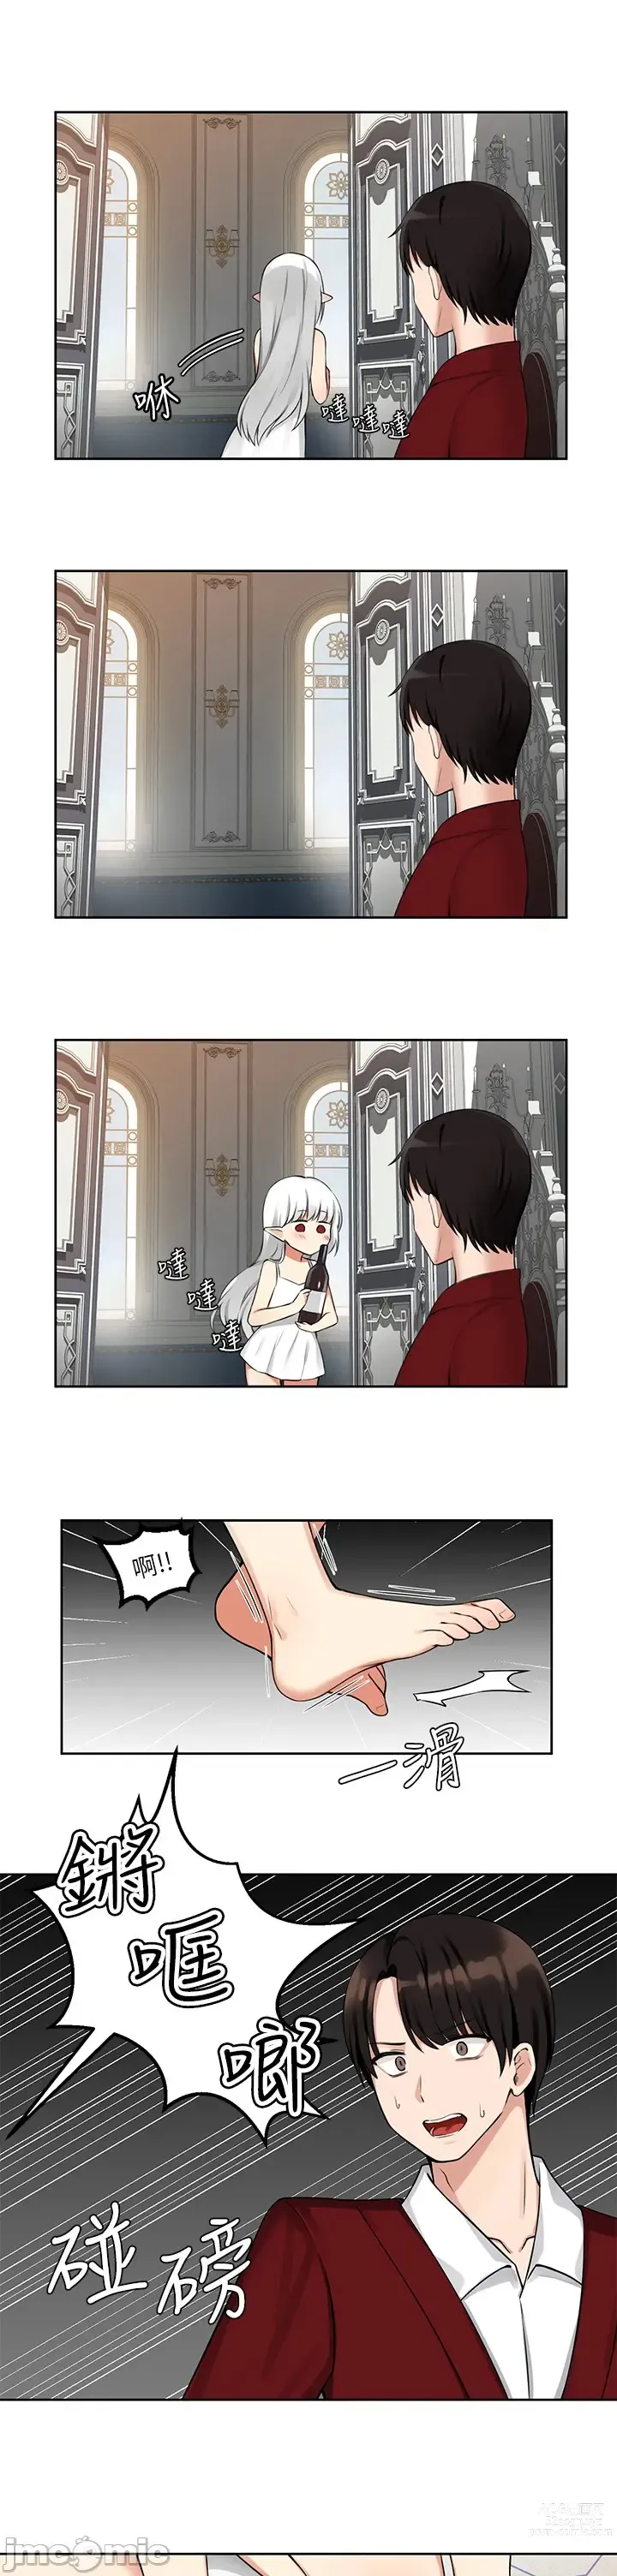 Page 21 of manga Elf Who Likes to be Humiliated Chapters 1 to 10